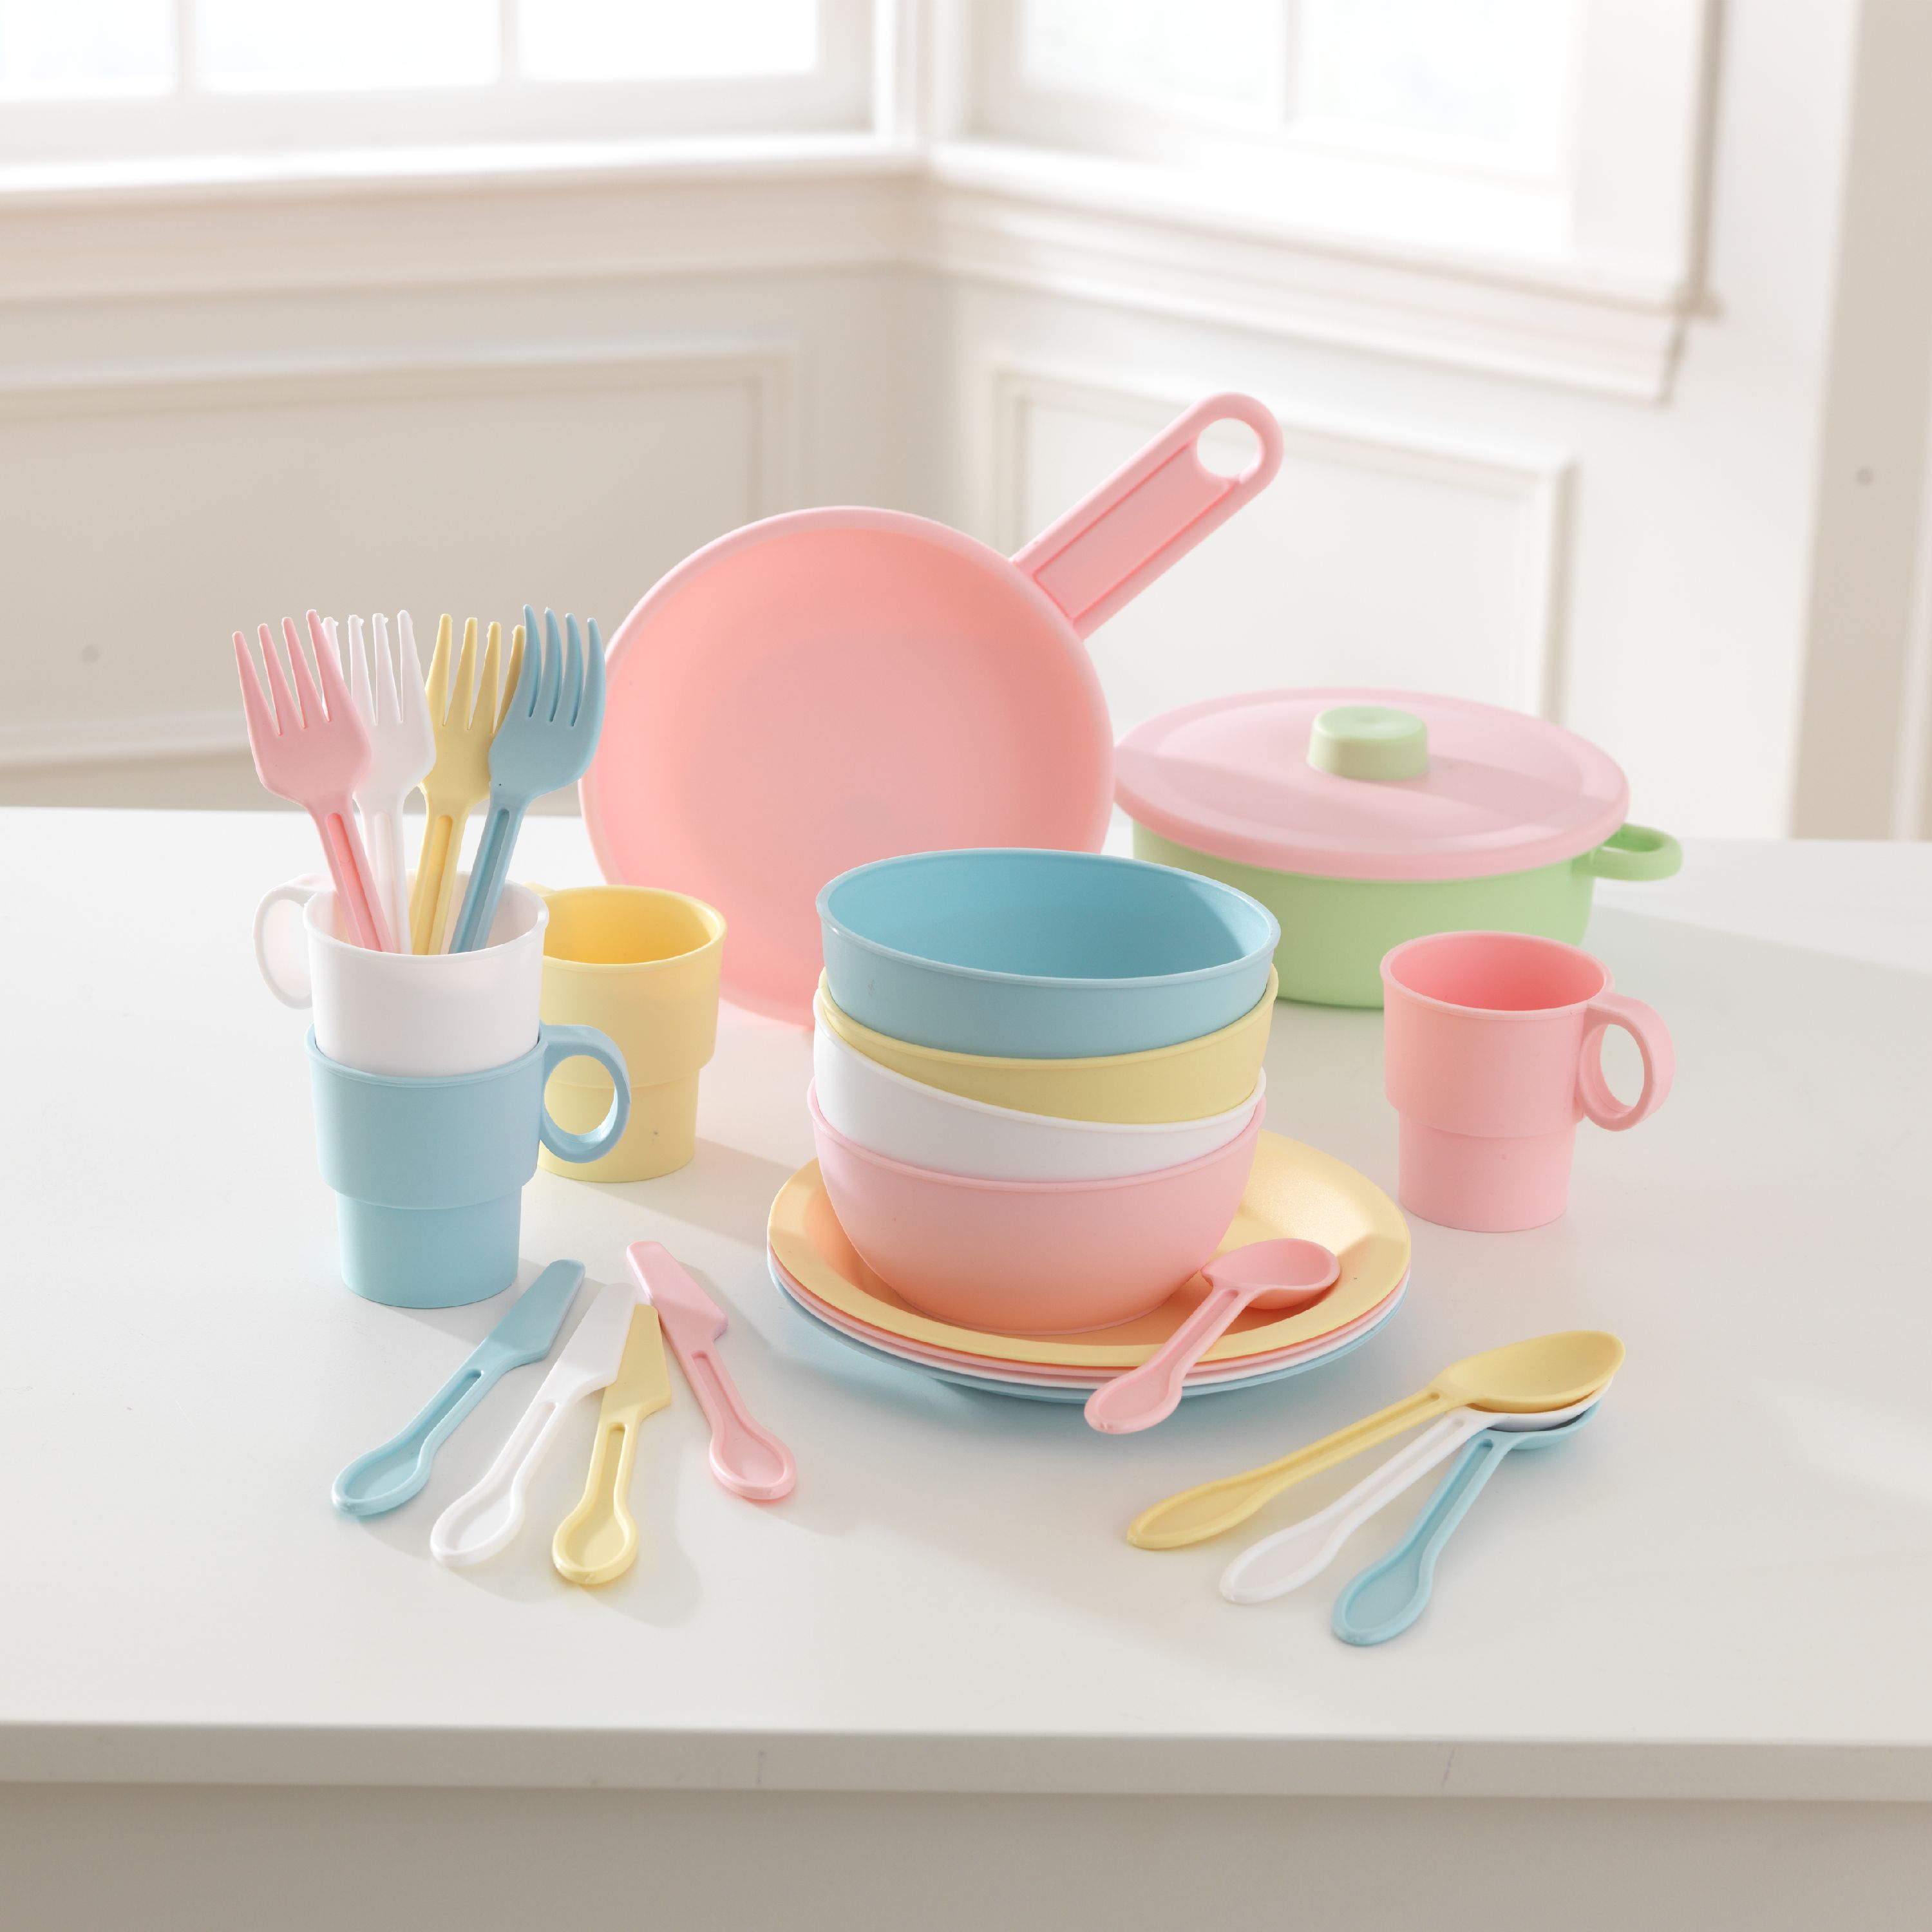 KidKraft 27-Piece Pastel Cookware Set, Plastic Dishes & Utensils for Play Kitchens - image 5 of 5